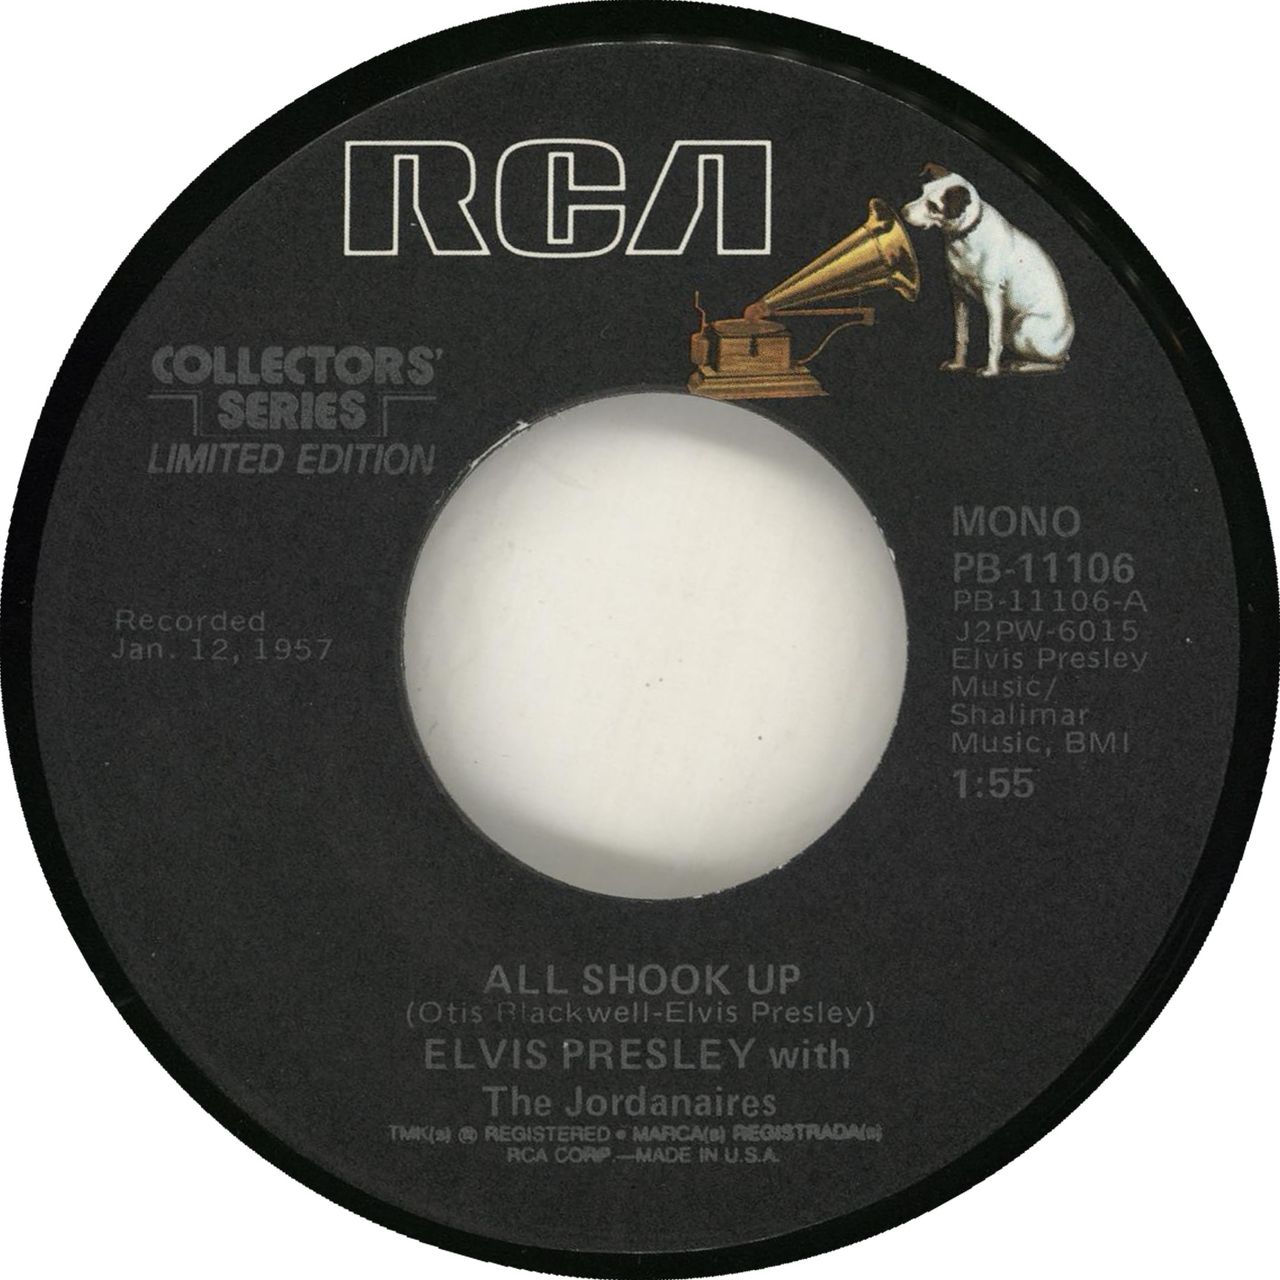 All Shock Up - song and lyrics by Elvis Presley